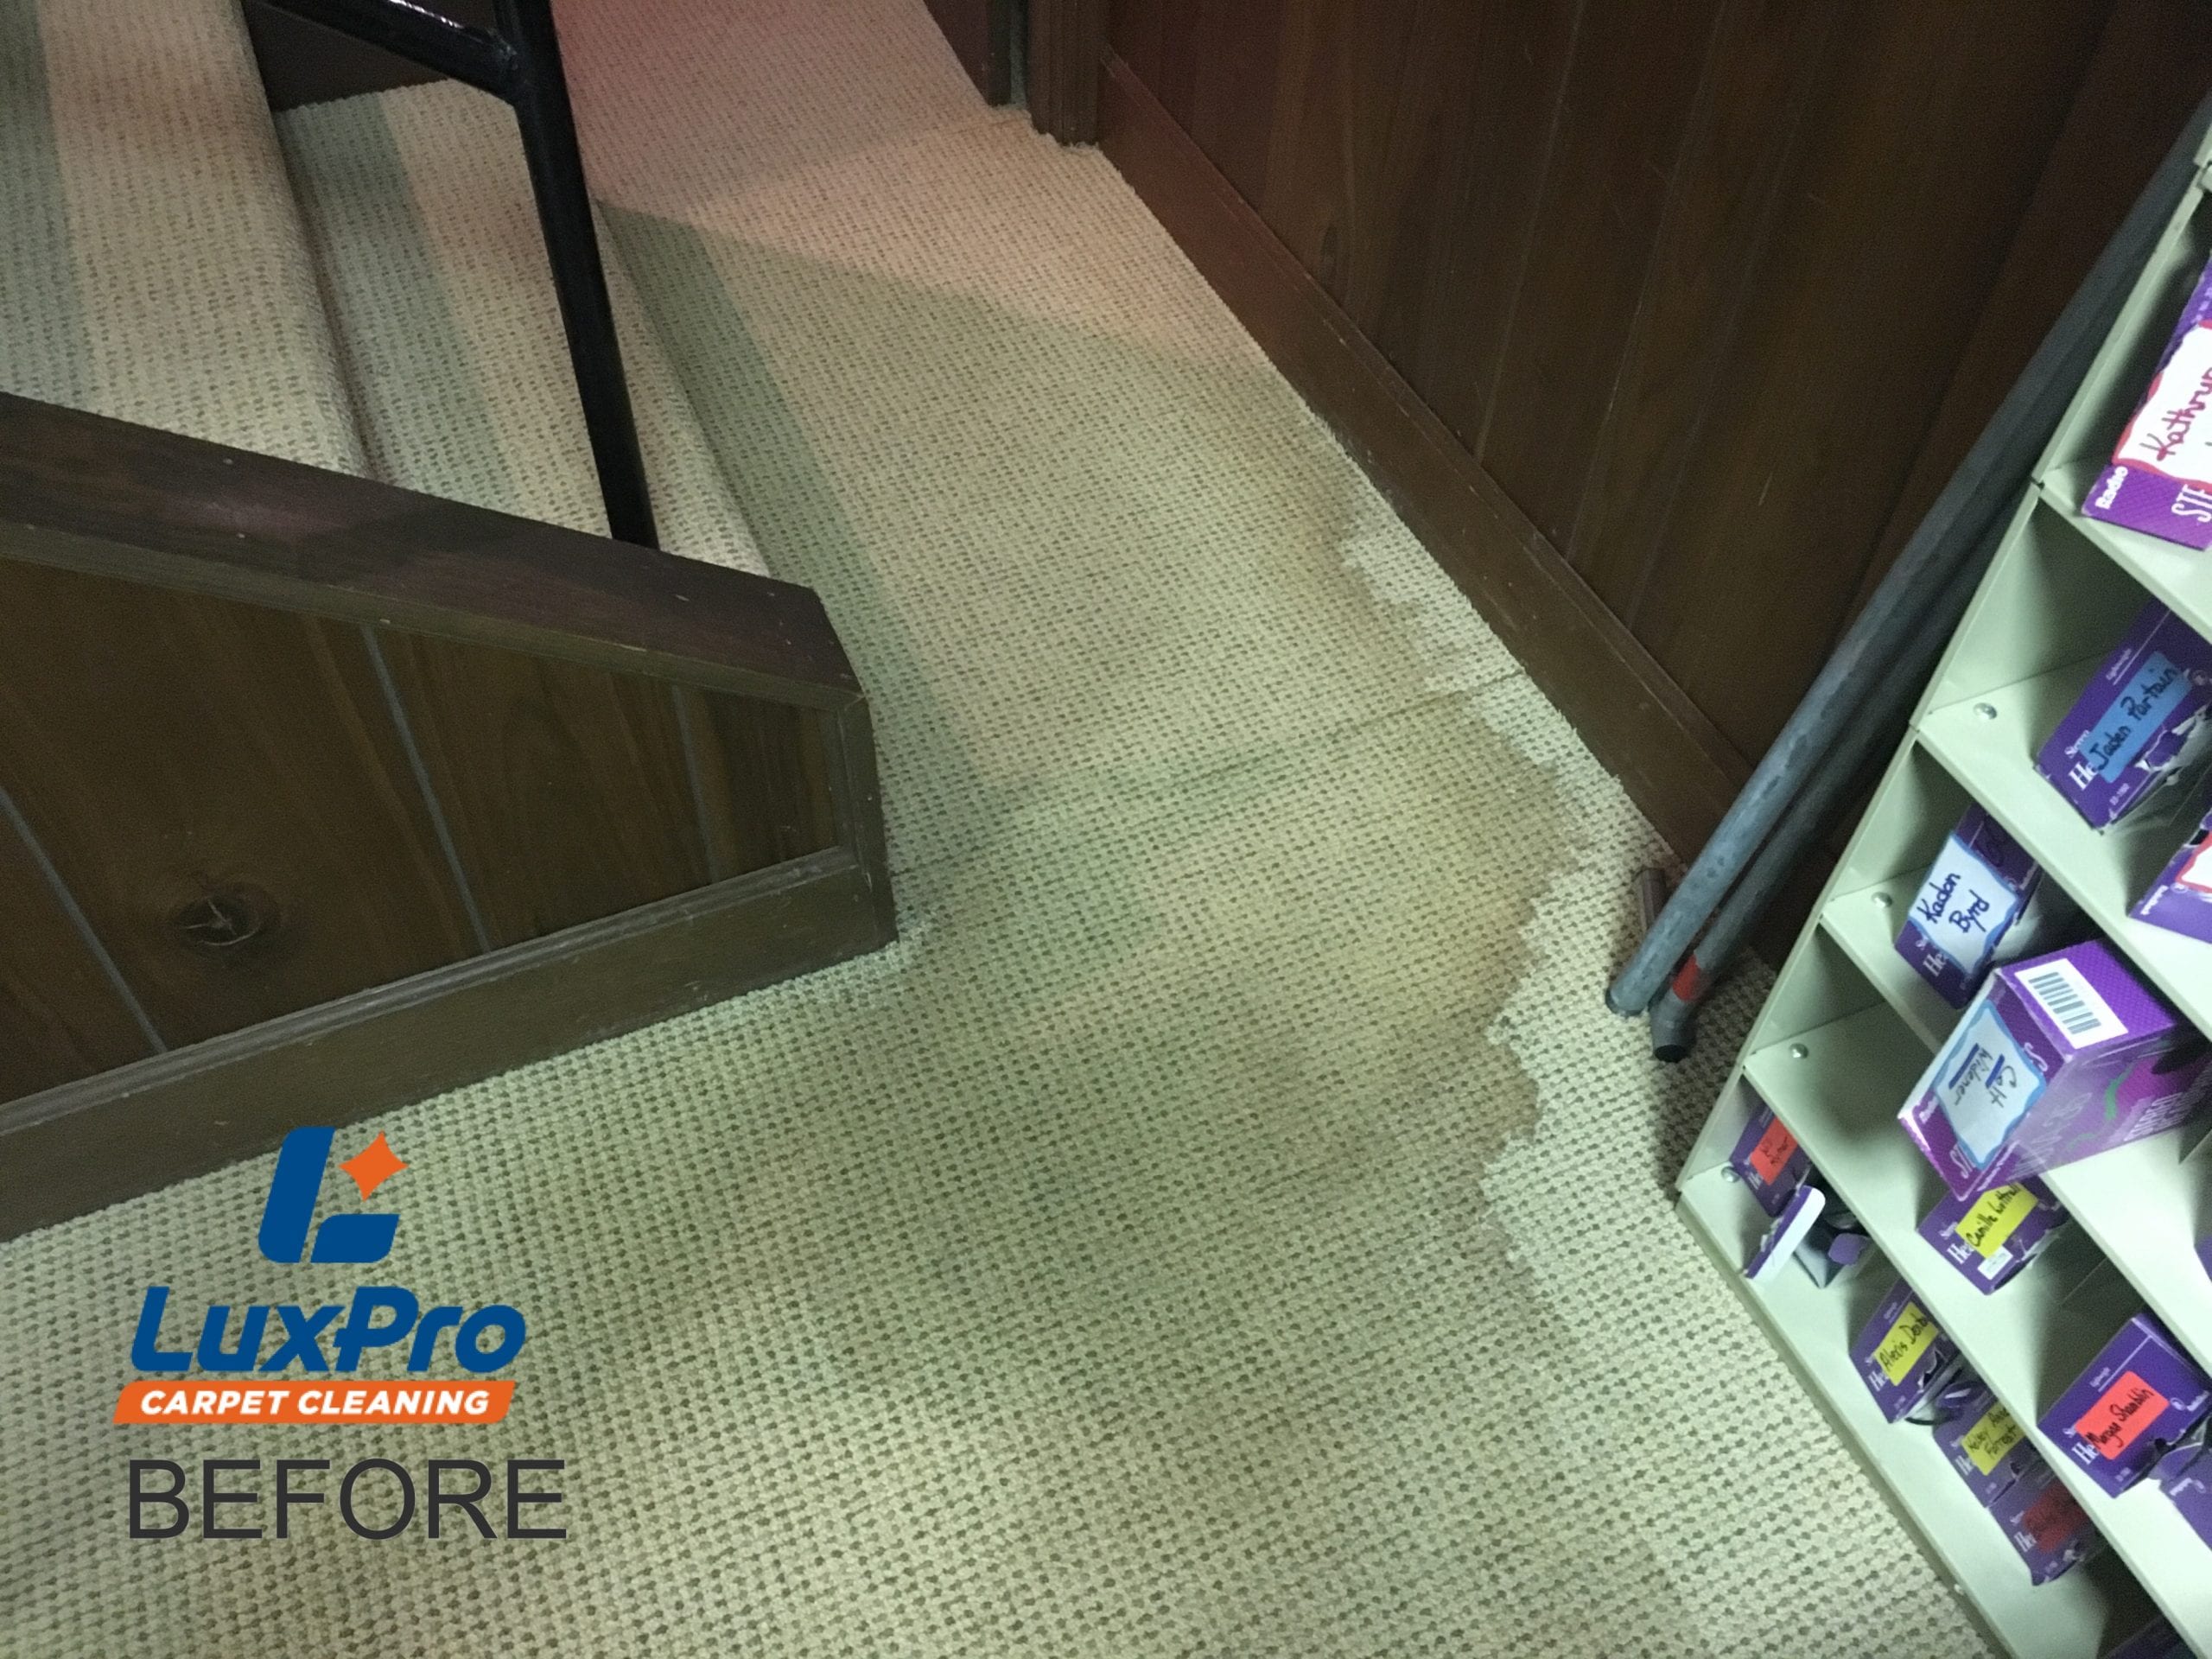 Before Carpet Cleaning In Niota & Cleveland, TN